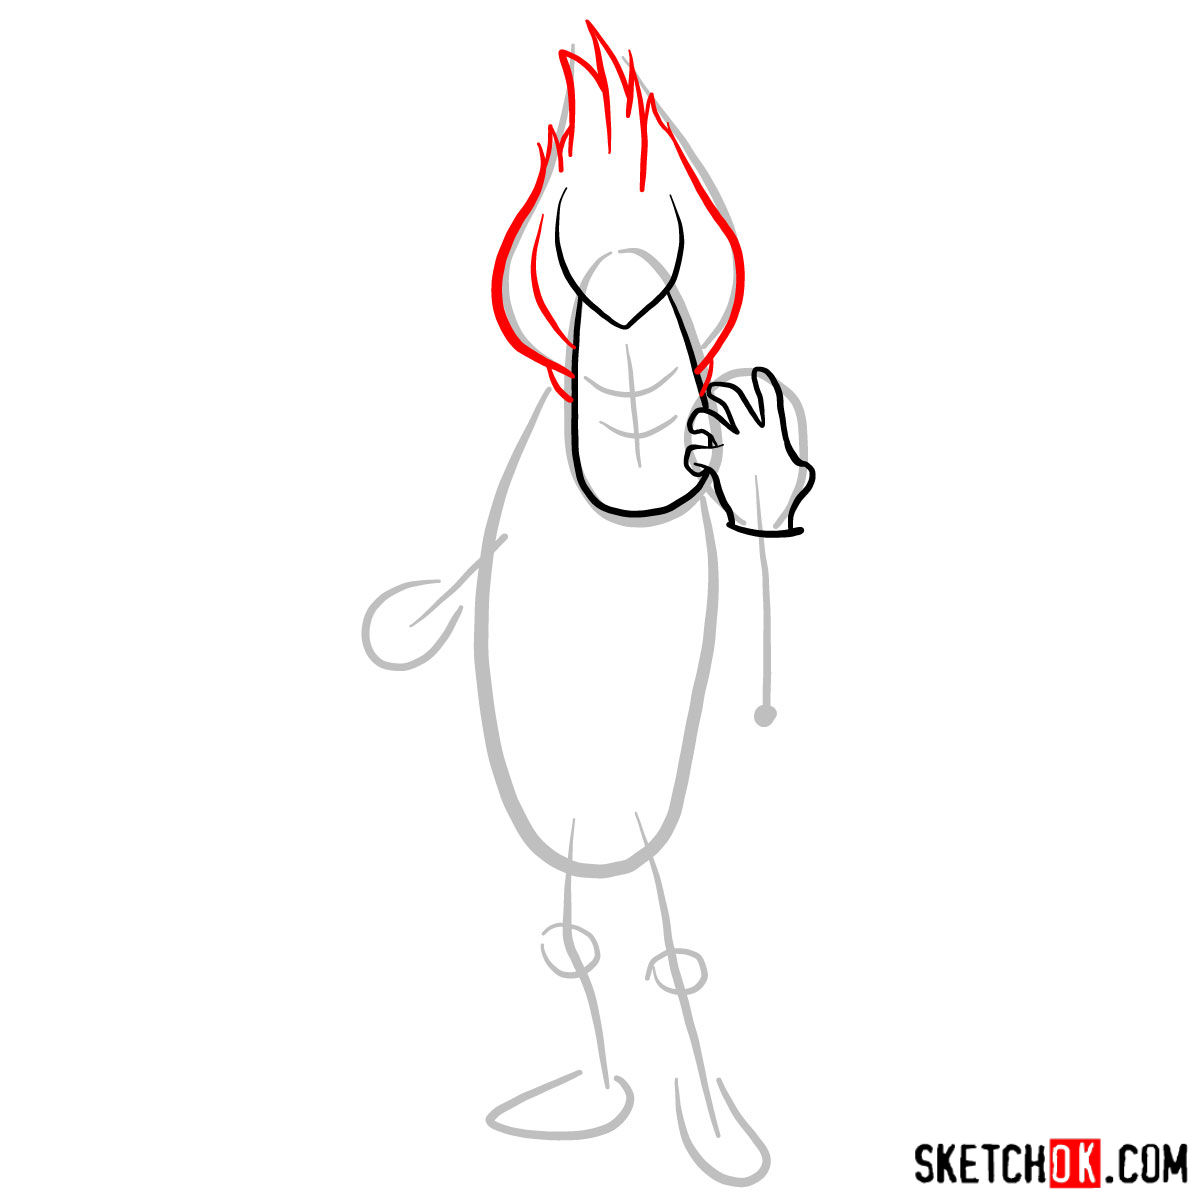 How to draw Buddy Pine (Syndrome) from The Incredibles - step 04